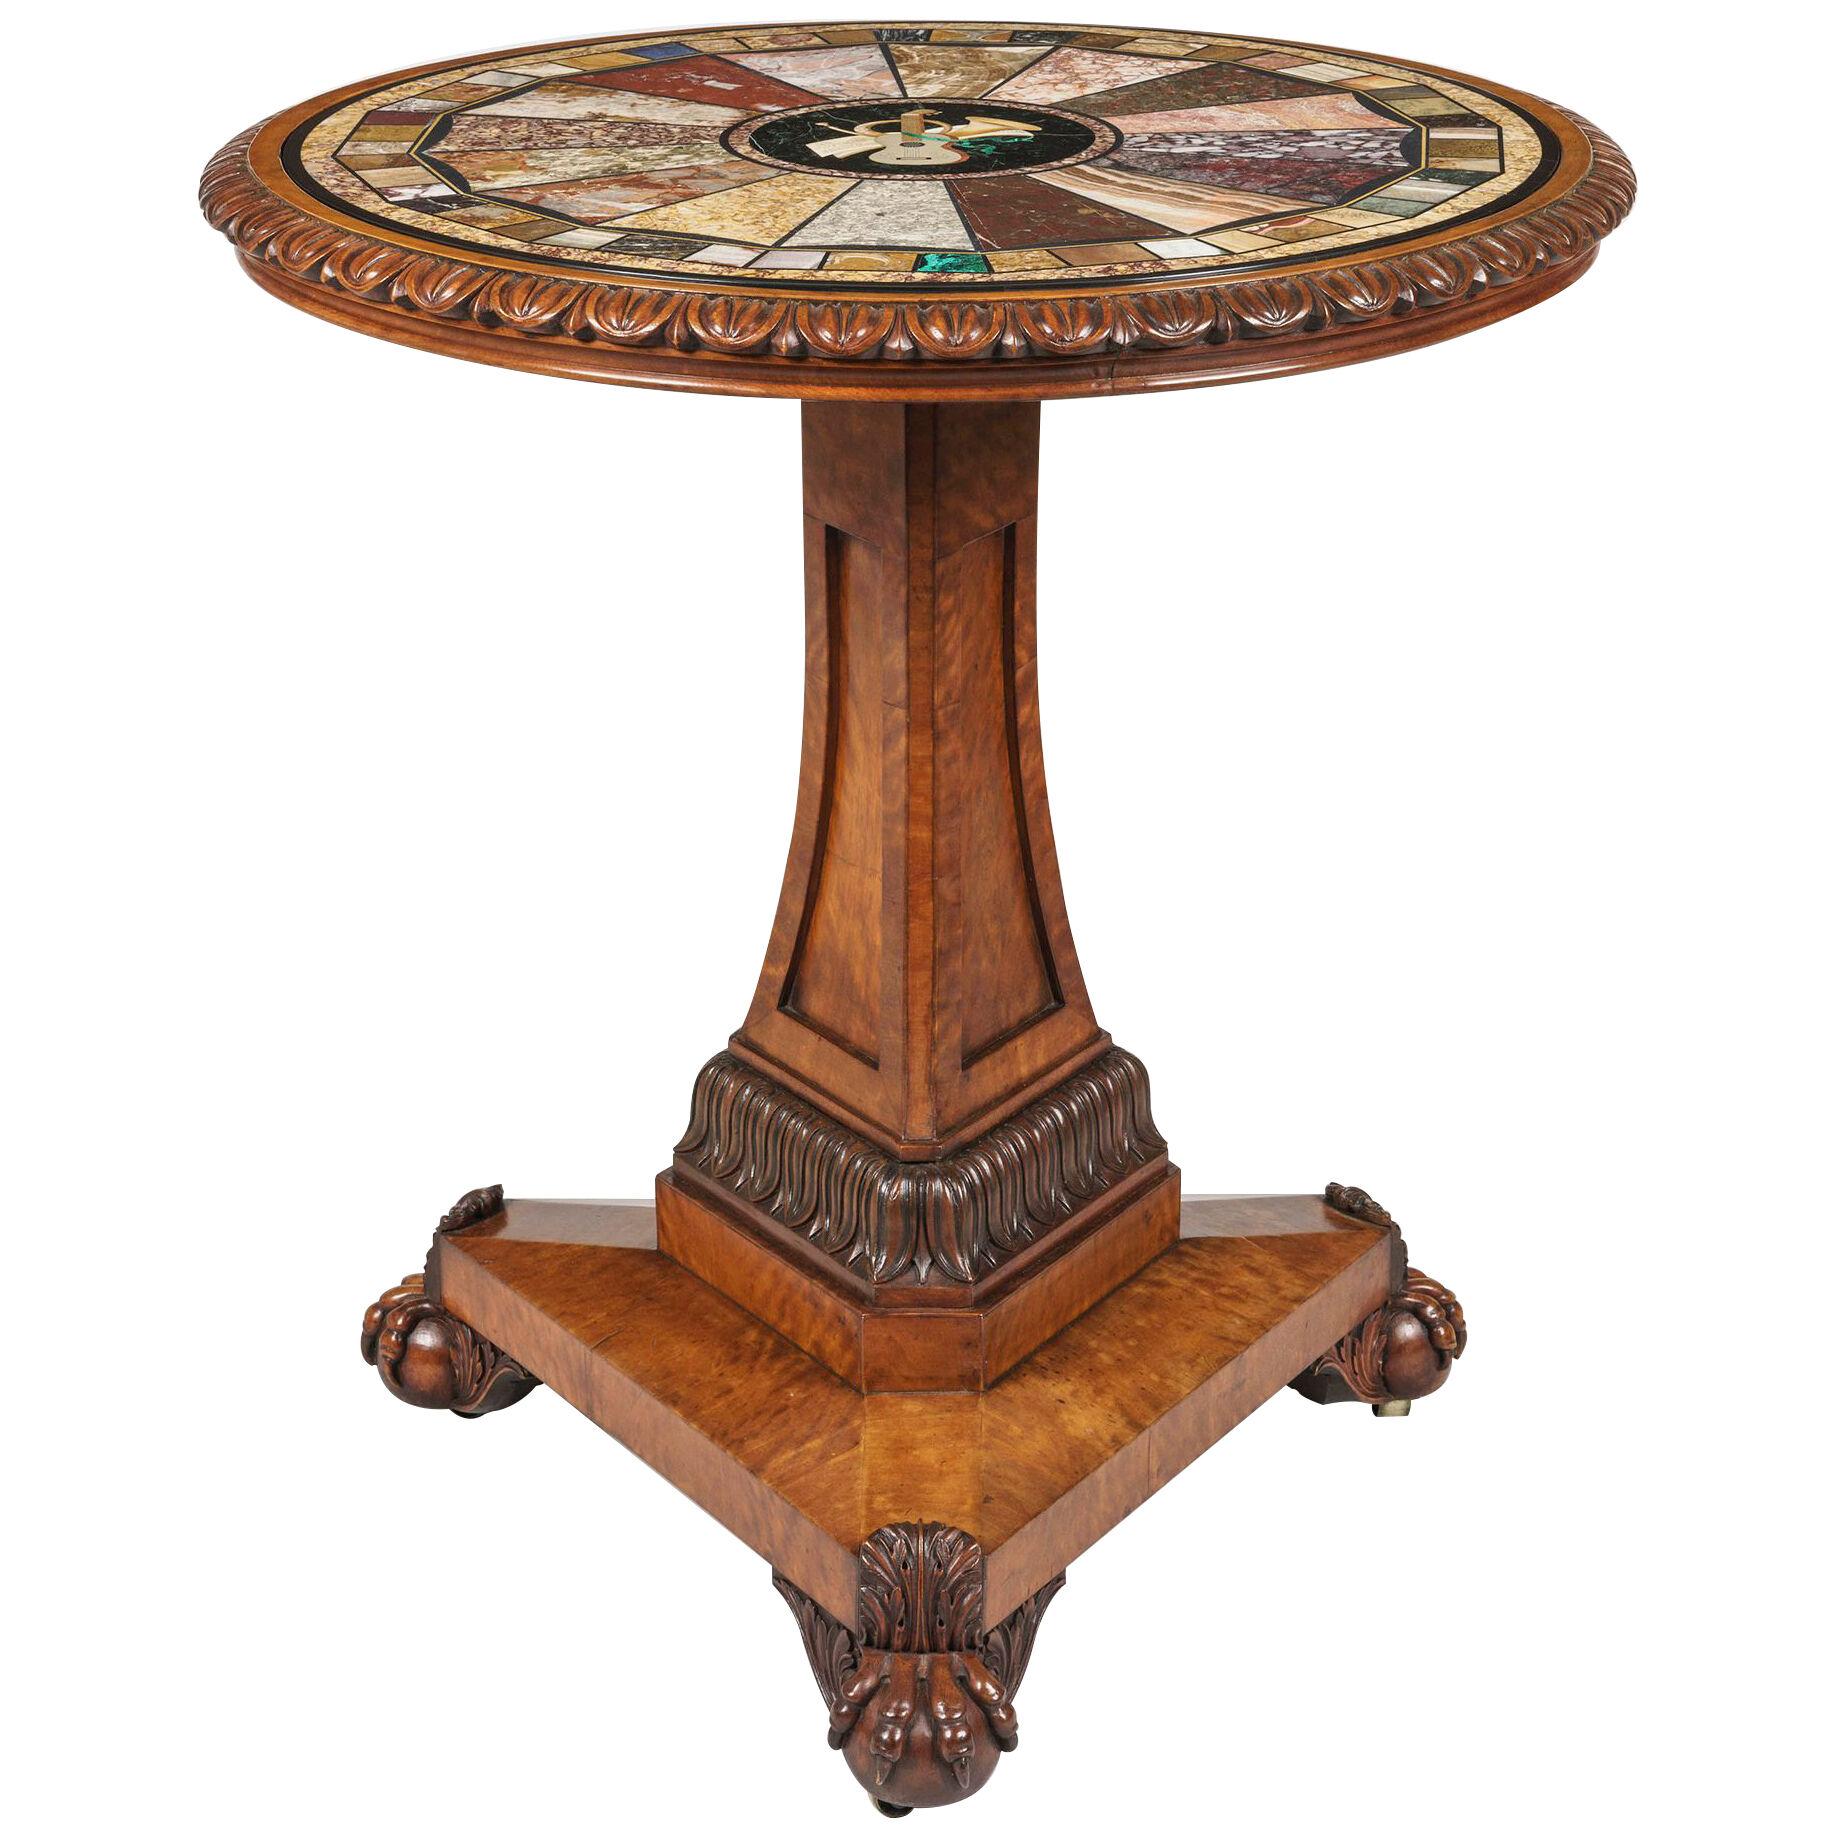 19th Century 'Grand Tour' Table on Carved Satinwood Base